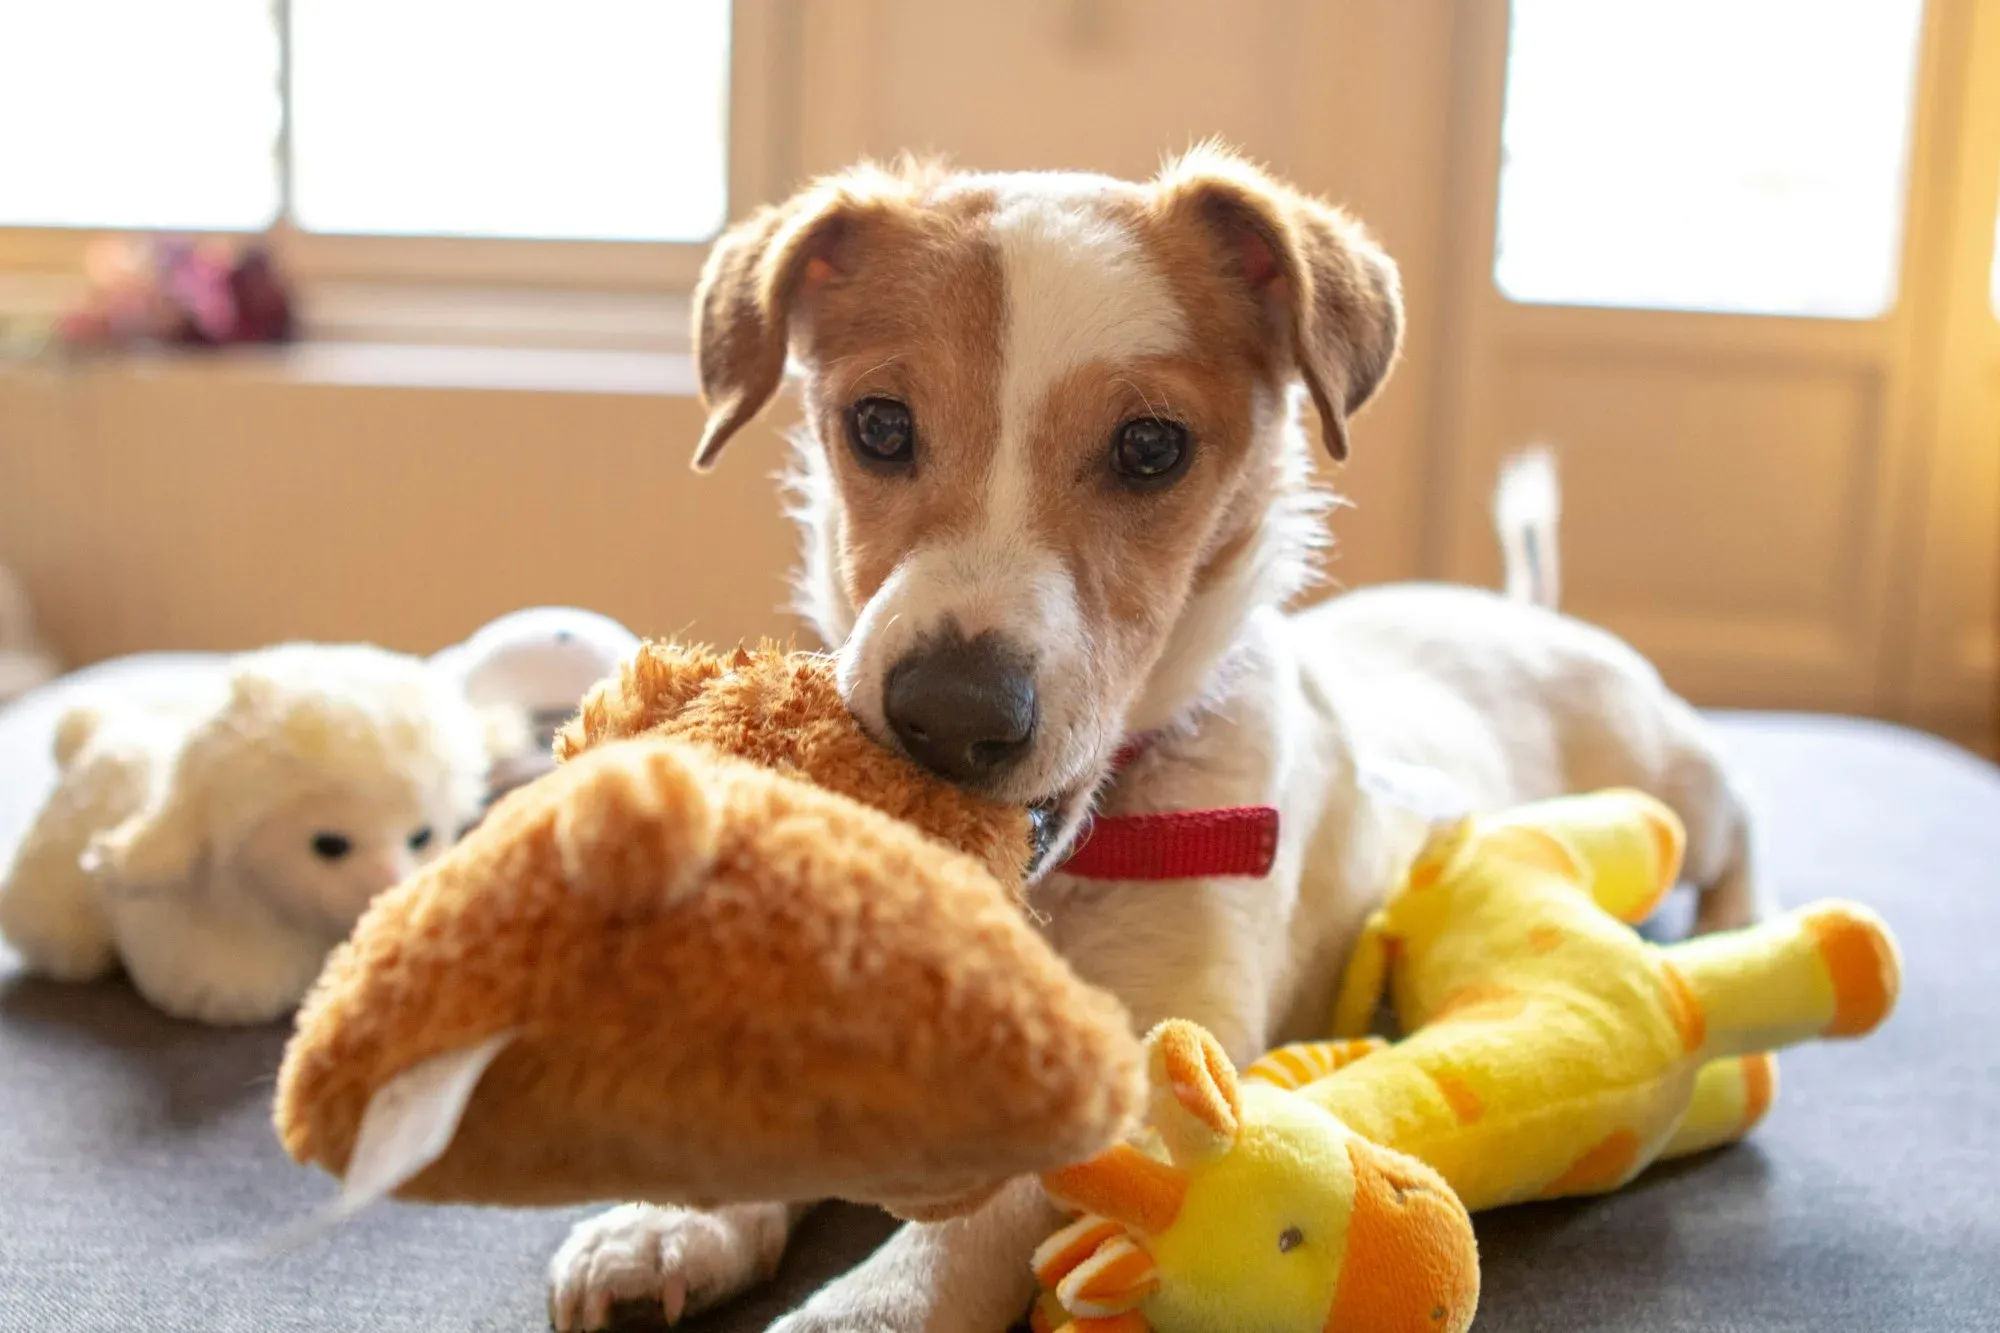 Are Some Breeds More Prone To Toy Shaking Behavior?